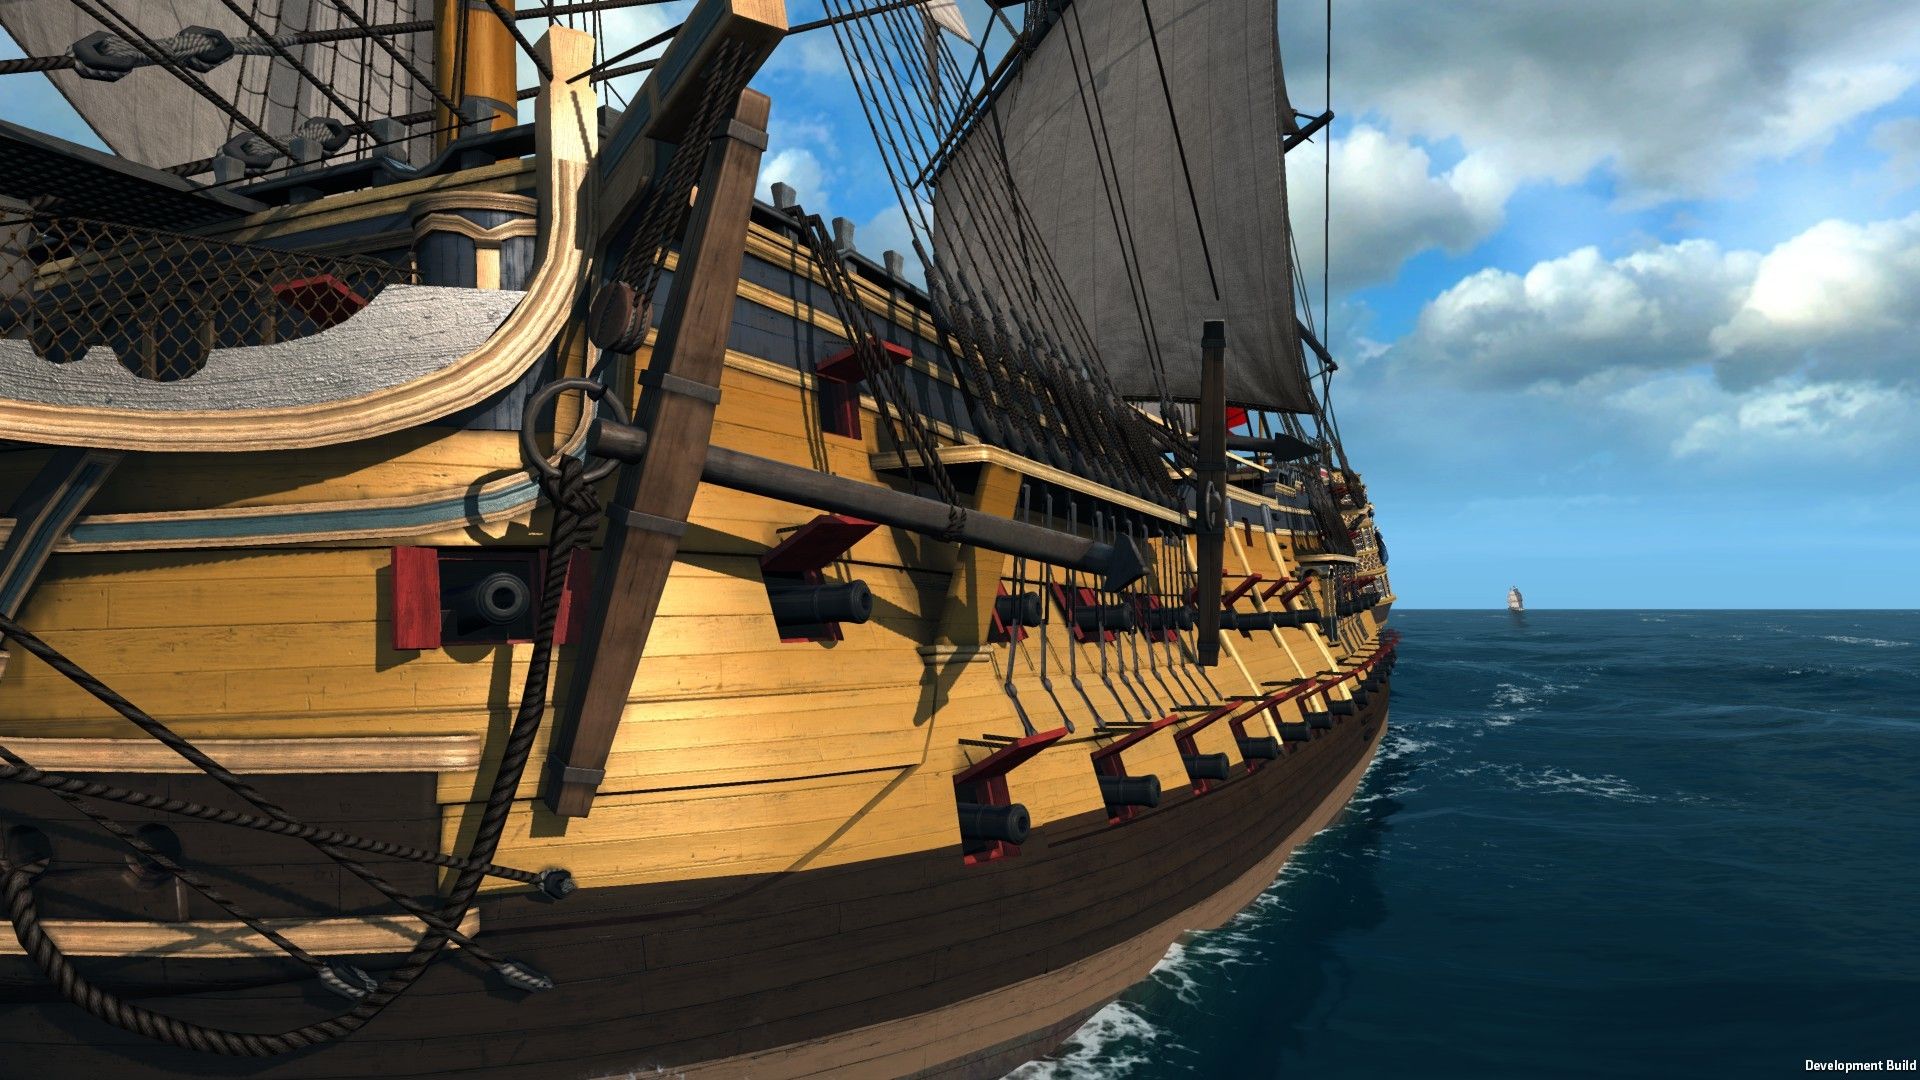 Naval Action - HMS Victory 1765